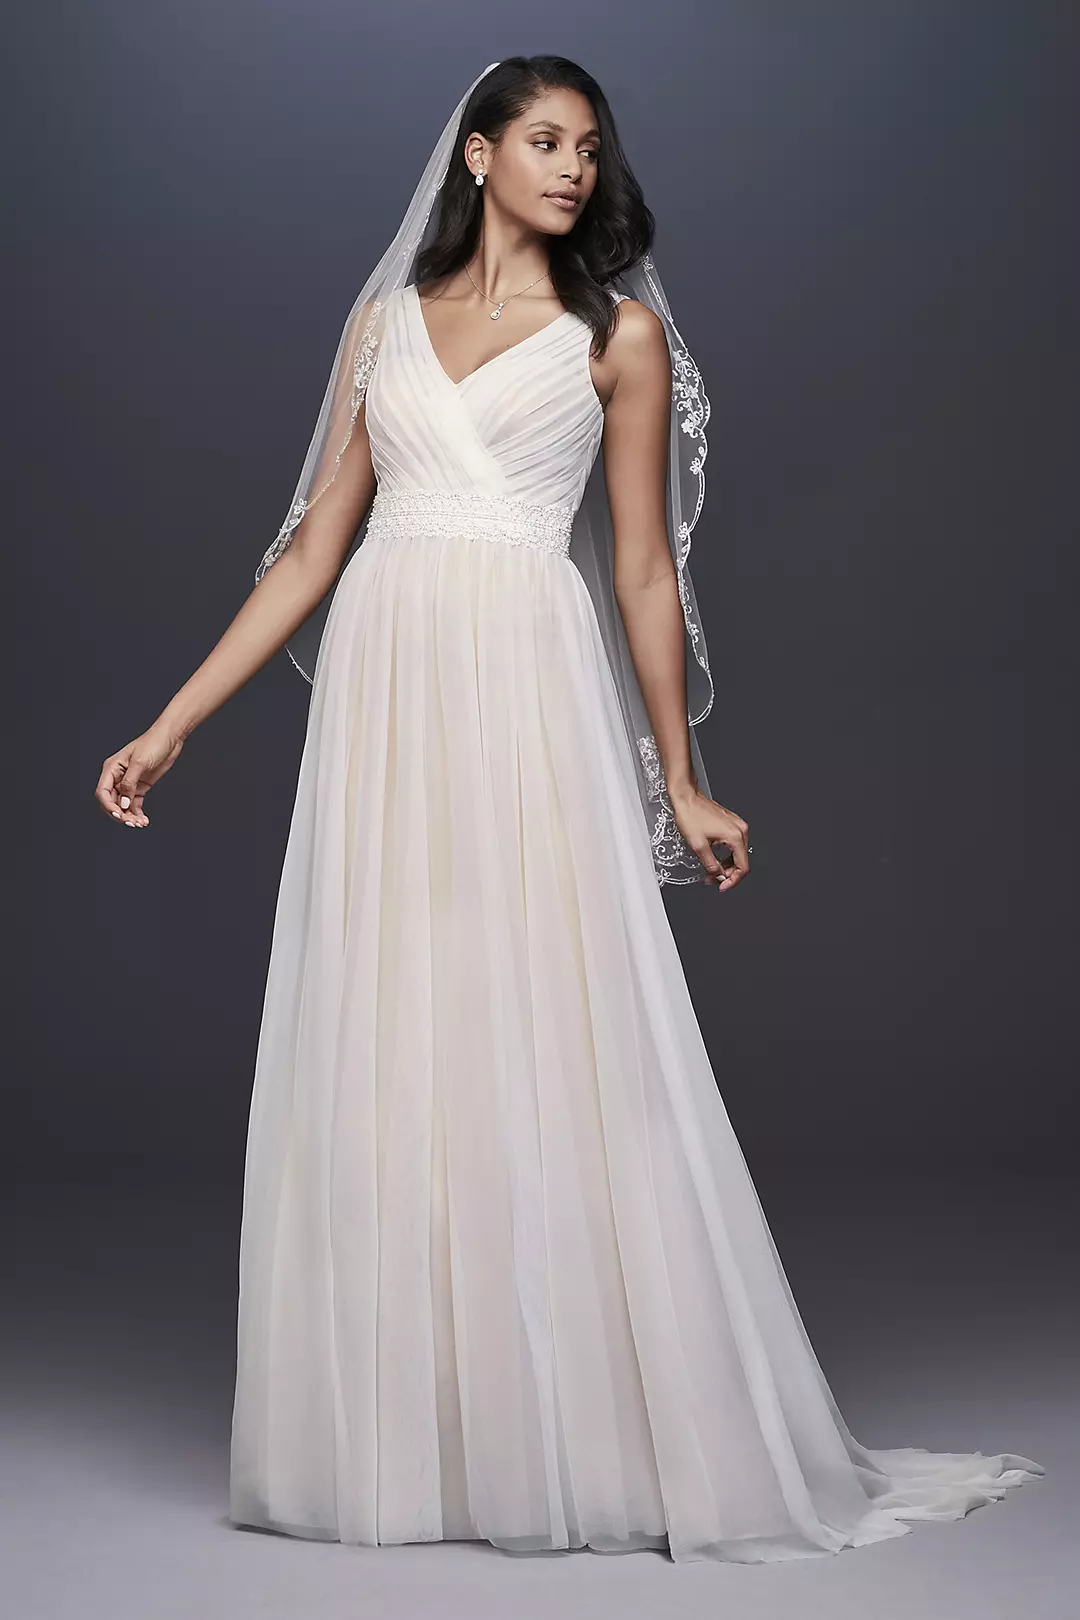 Pleated Tulle Tank Wedding Dress with Lace Waist Image